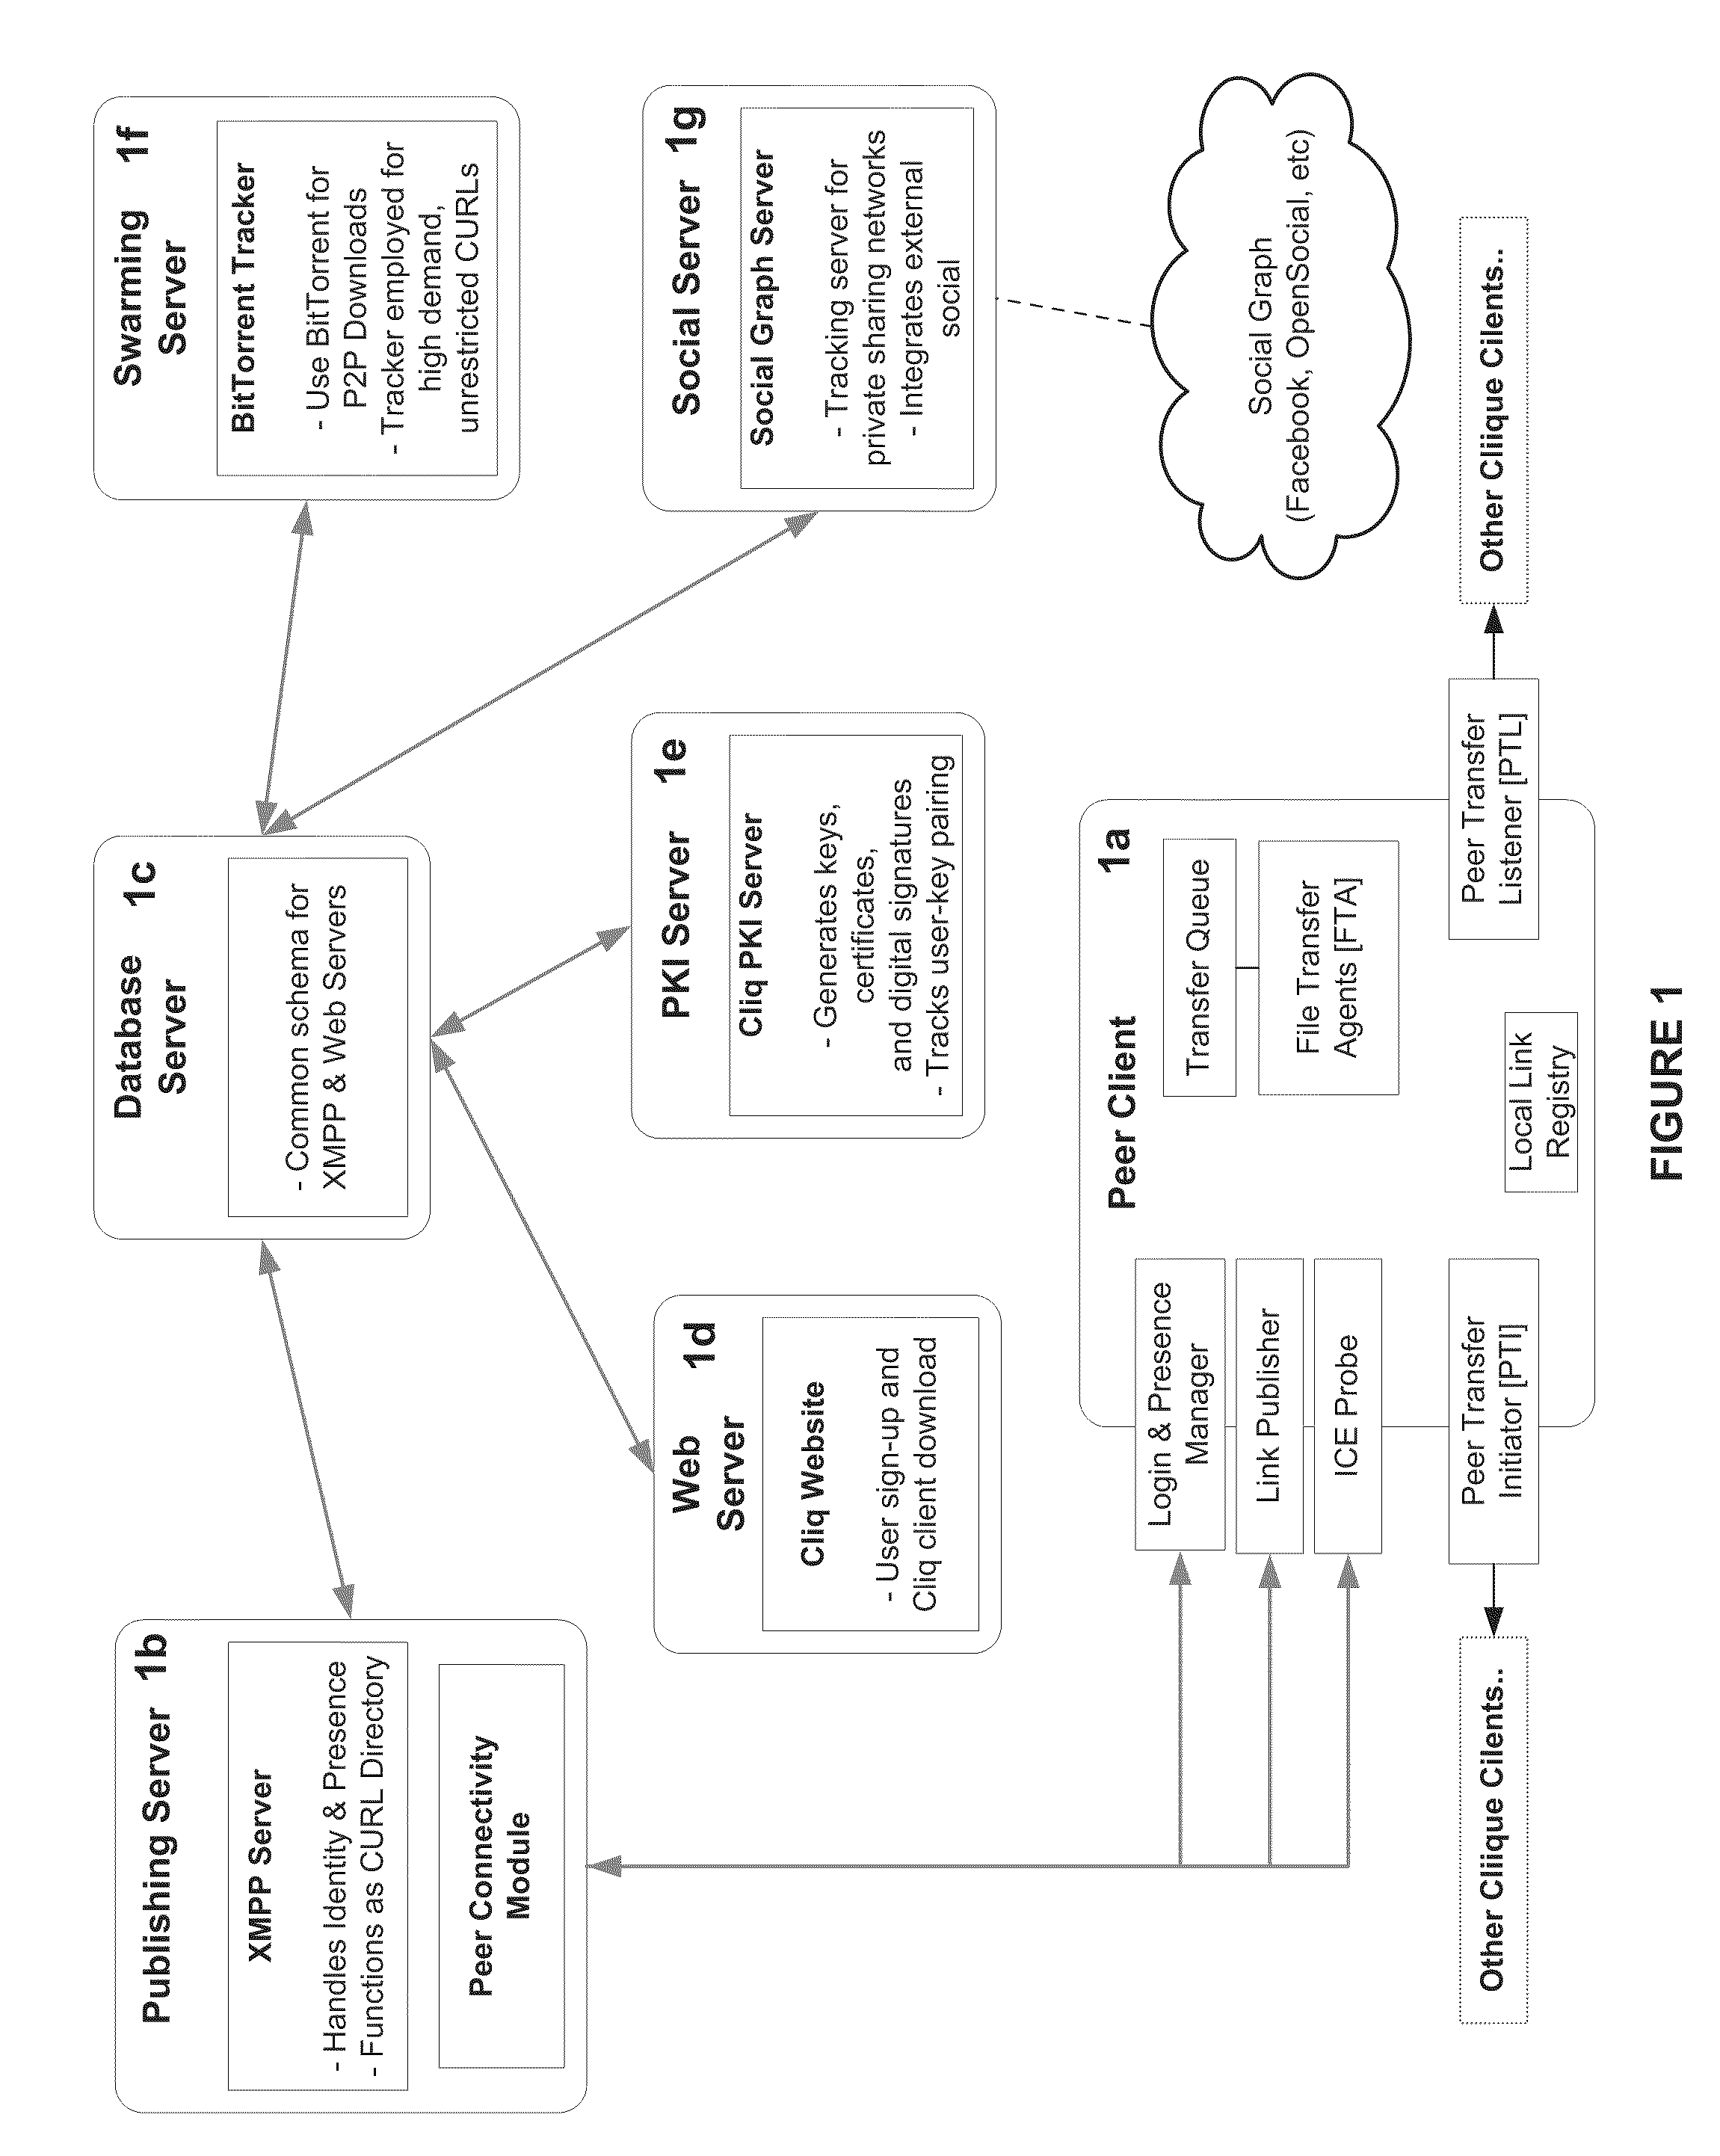 System and Method for Anonymous Addressing of Content on Network Peers and for Private Peer-to-Peer File Sharing